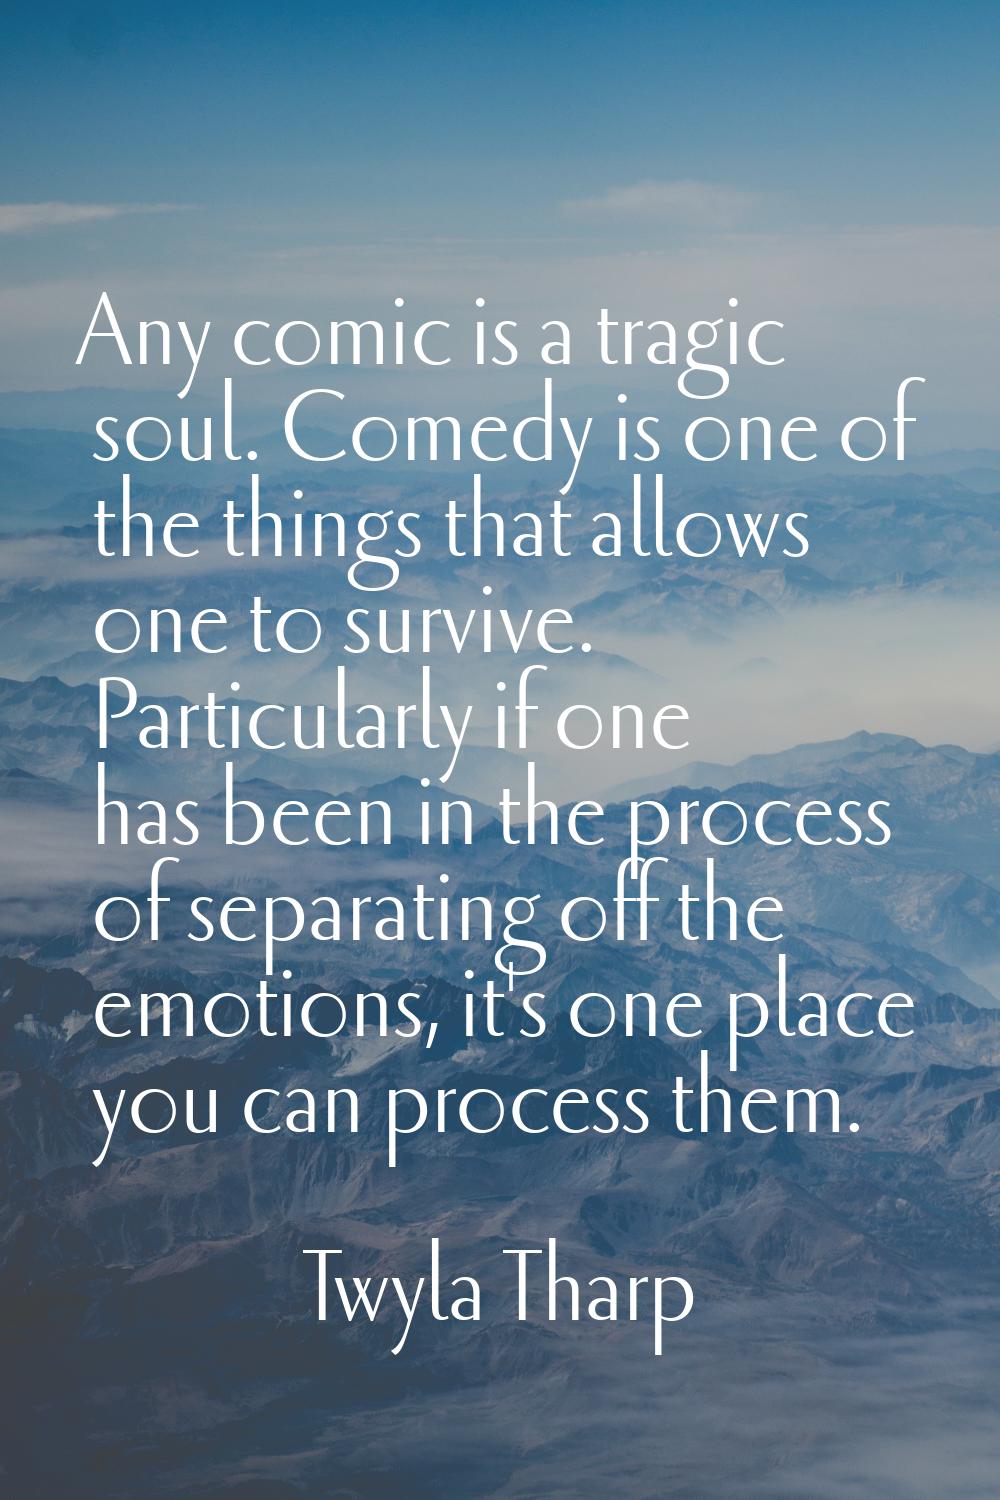 Any comic is a tragic soul. Comedy is one of the things that allows one to survive. Particularly if